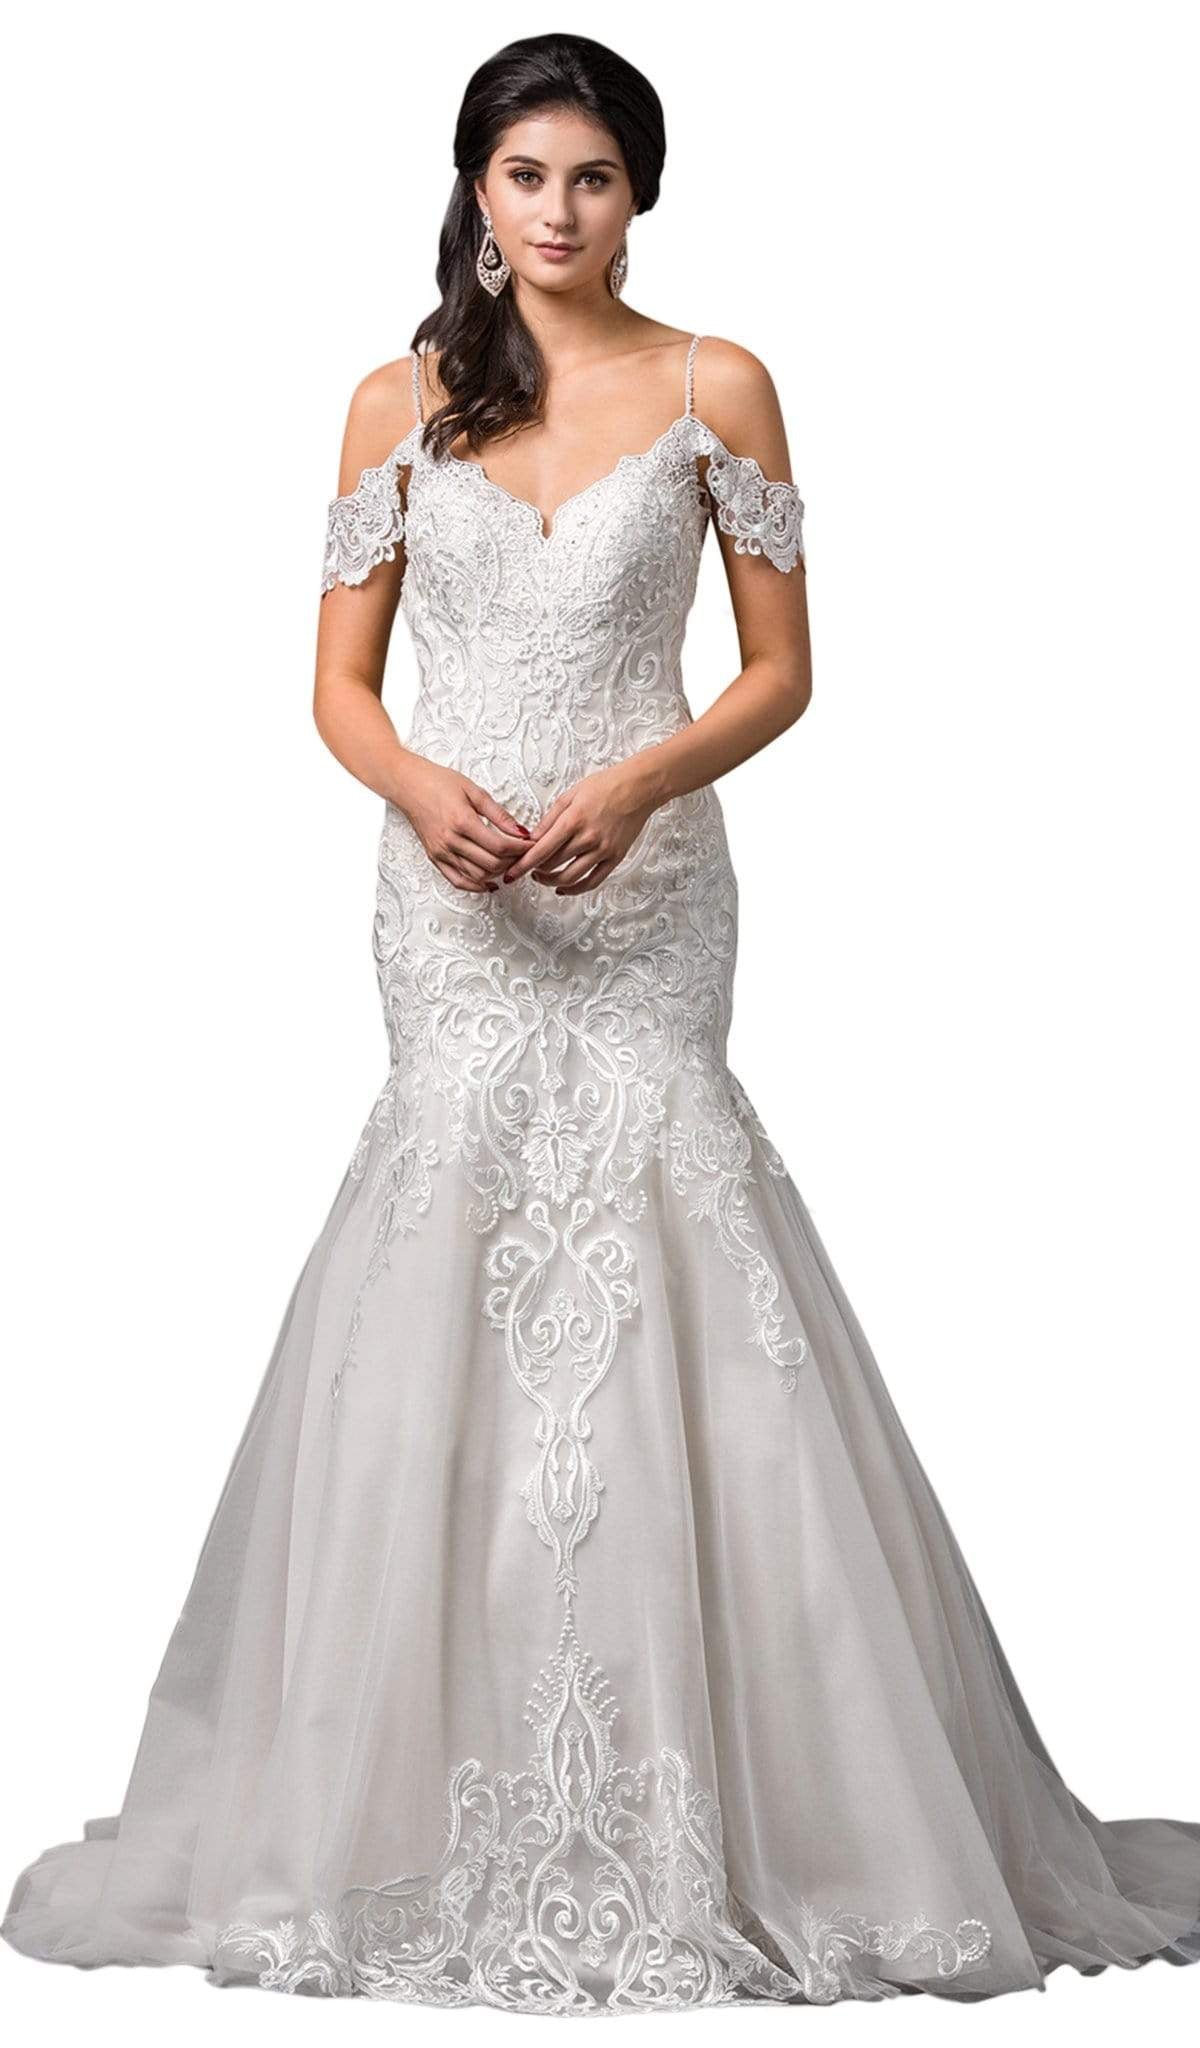 Image of Dancing Queen Bridal - 100 Lace Embroidered Trumpet Wedding Dress